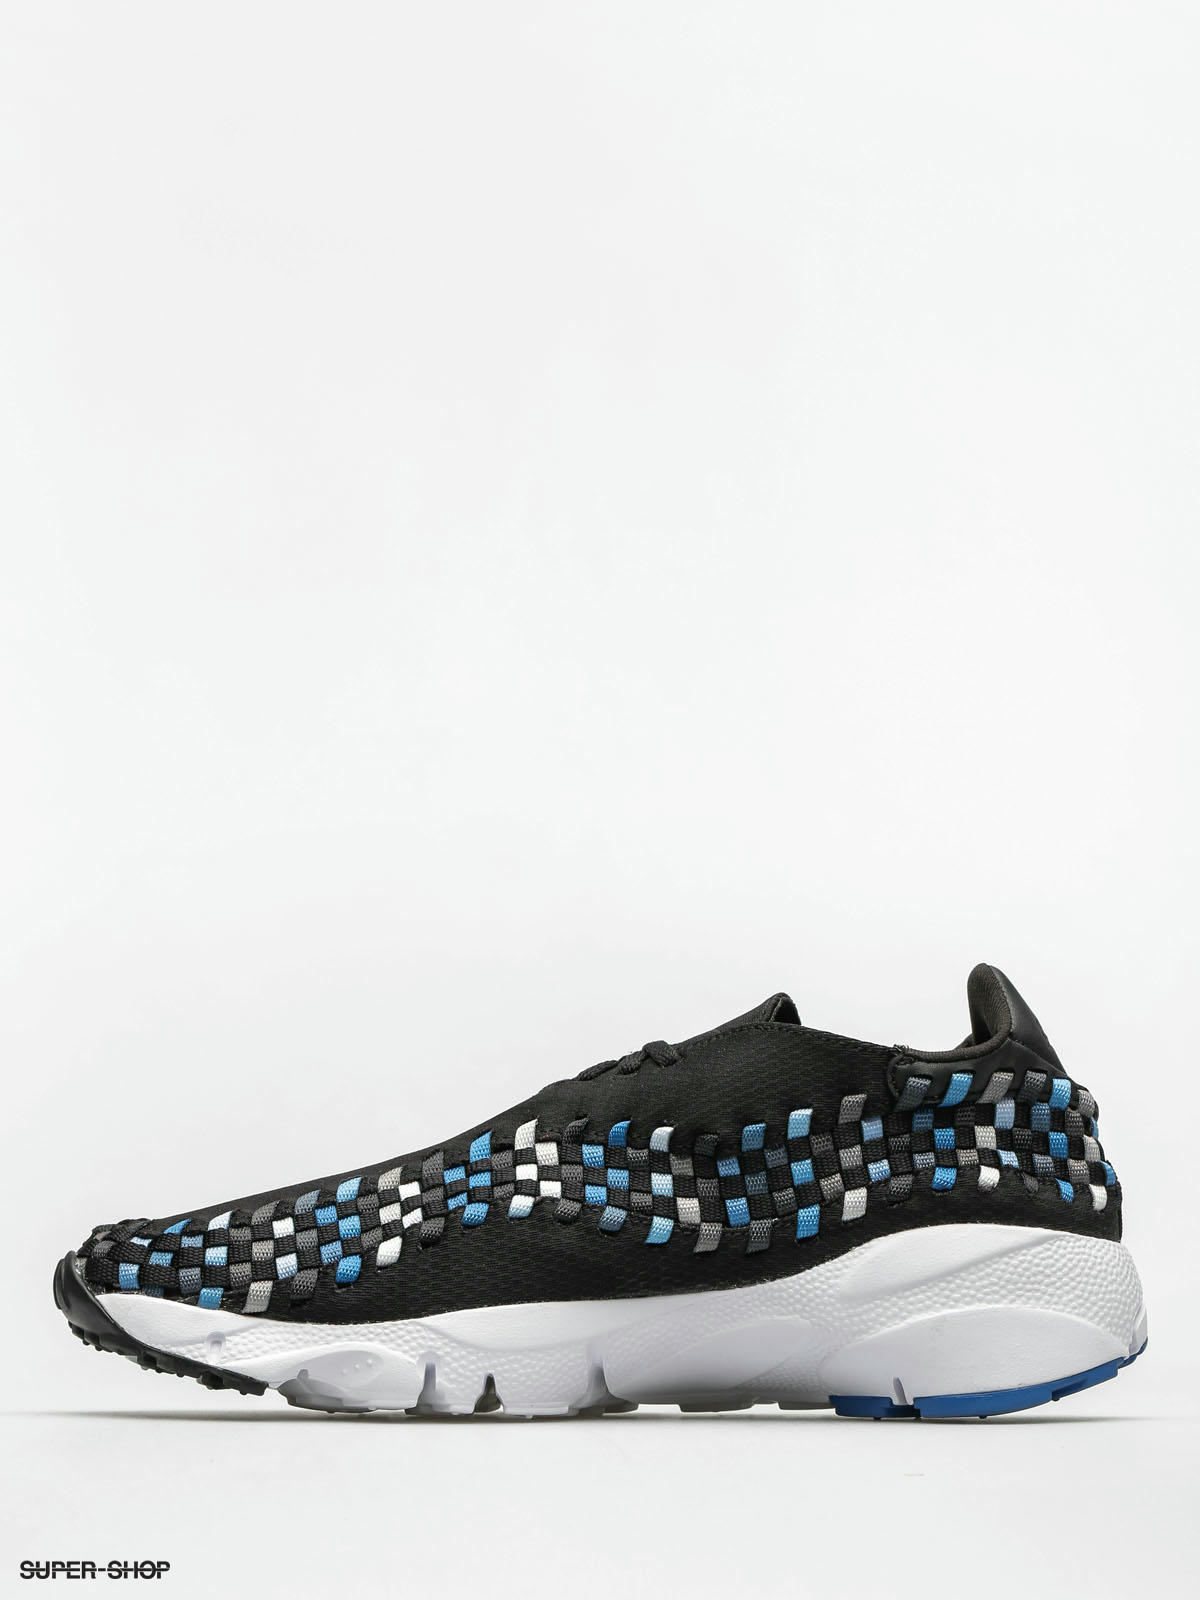 Nike Air Footscape Woven Nm Shoes 